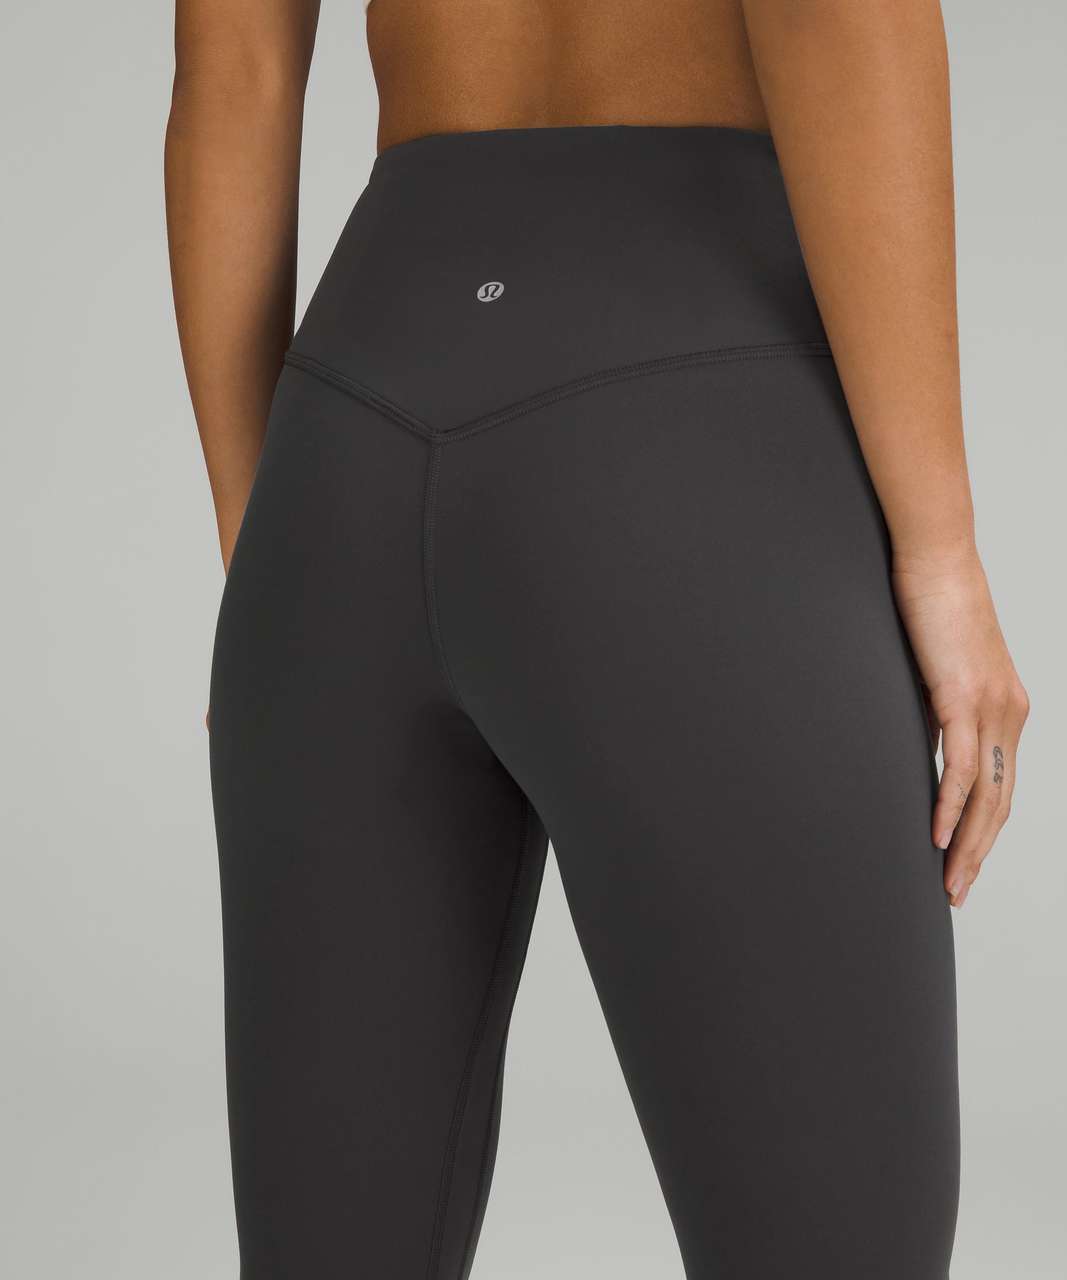 NWT Lululemon Align Pant Size 2 GGRE Graphite Grey 25 Sold Out!